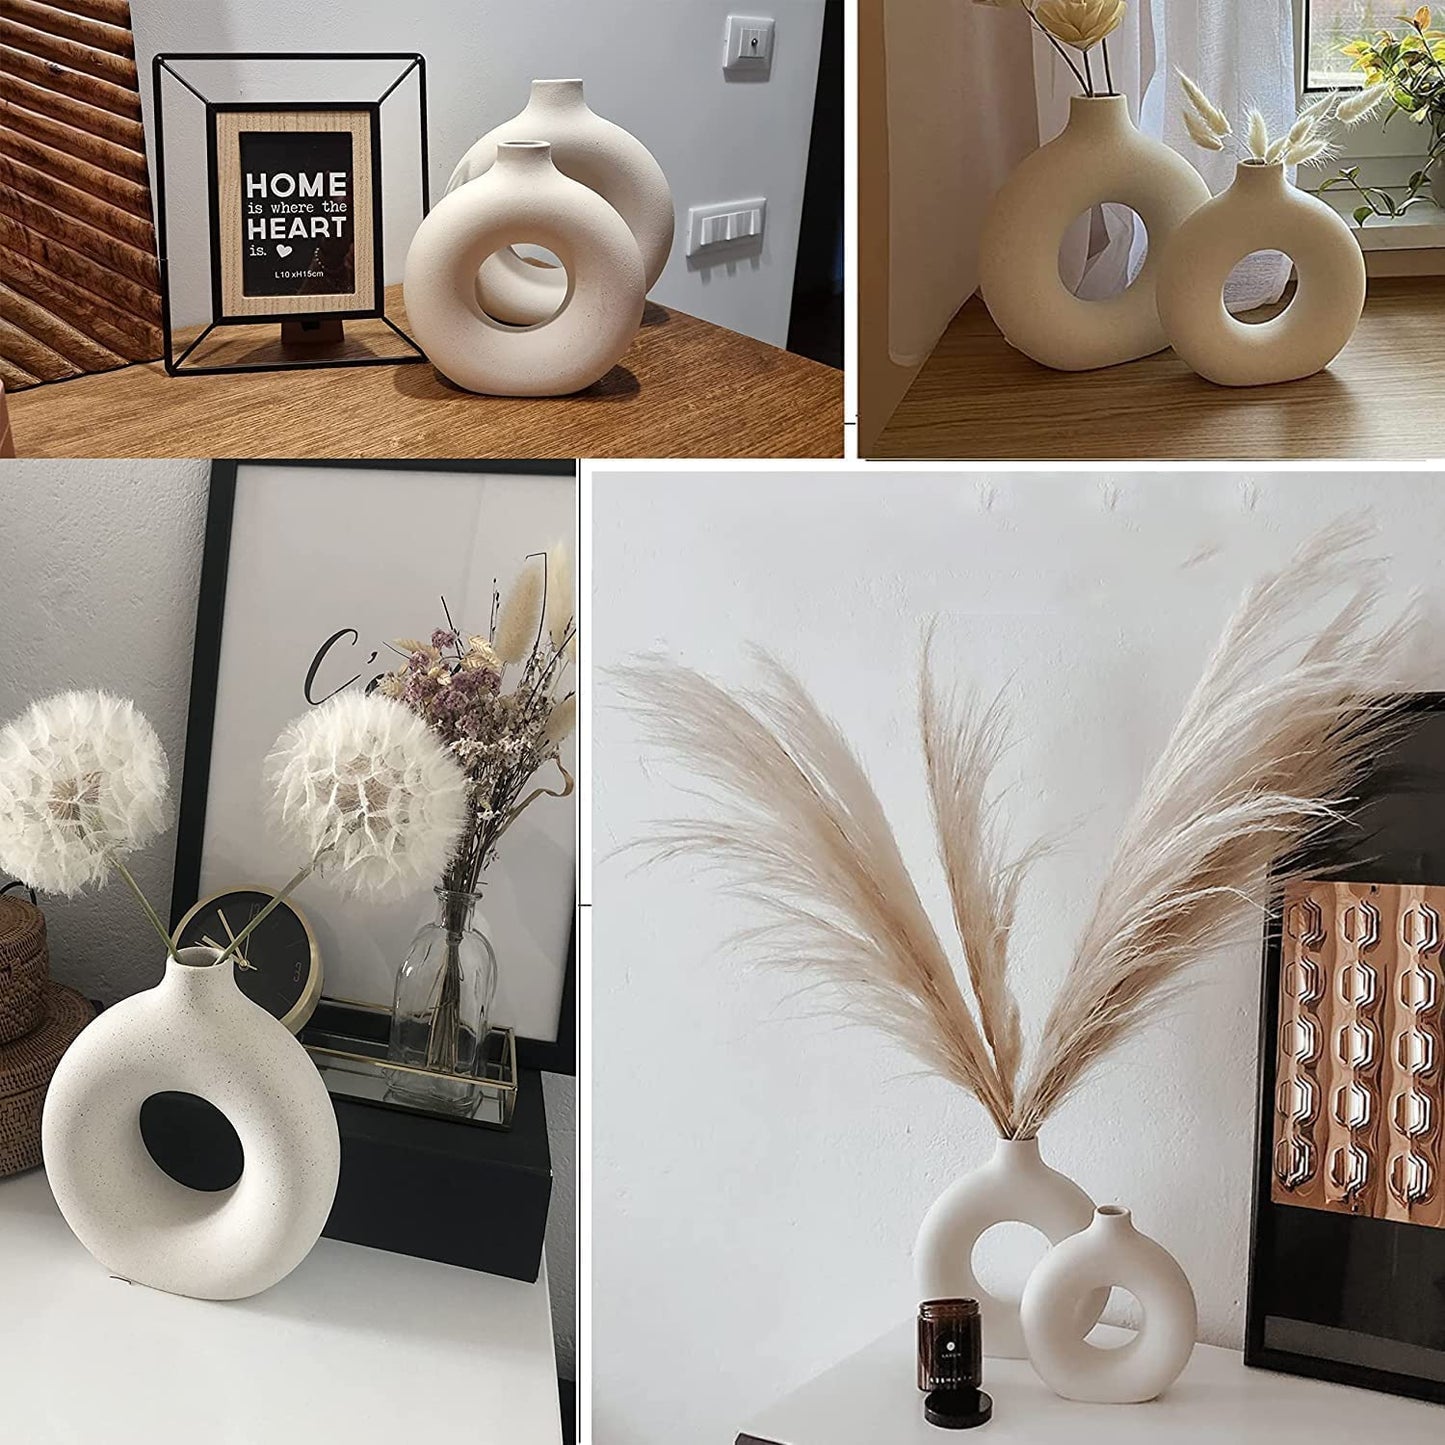 2 pieces,Ceramic Vase Set 2 for Modern Home Decor,Round Matte Pampas Flower Vases Minimalist Nordic Boho Ins Style for Wedding Dinner Table Party Living Room Office Bedroom, Decorative Gift (White)